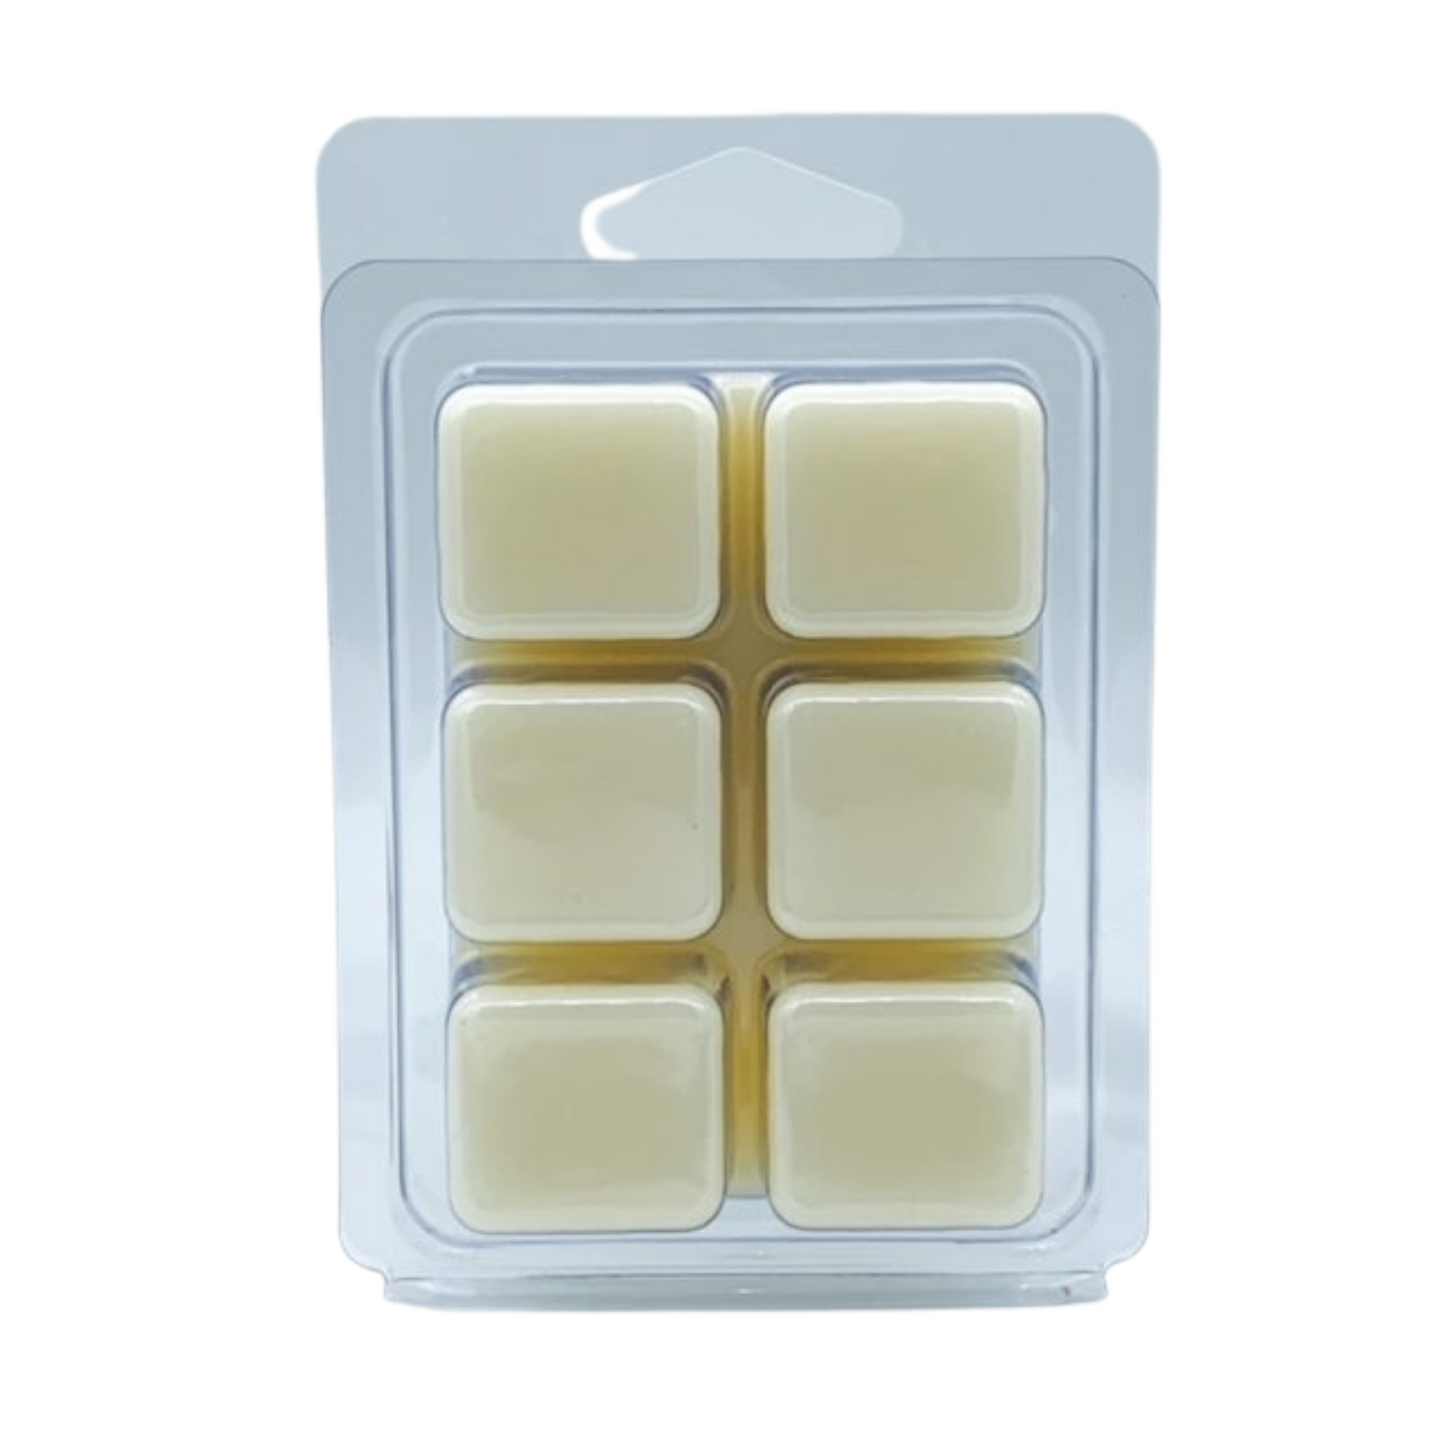 COCONUT MANGO | Scented Soy Wax Melts